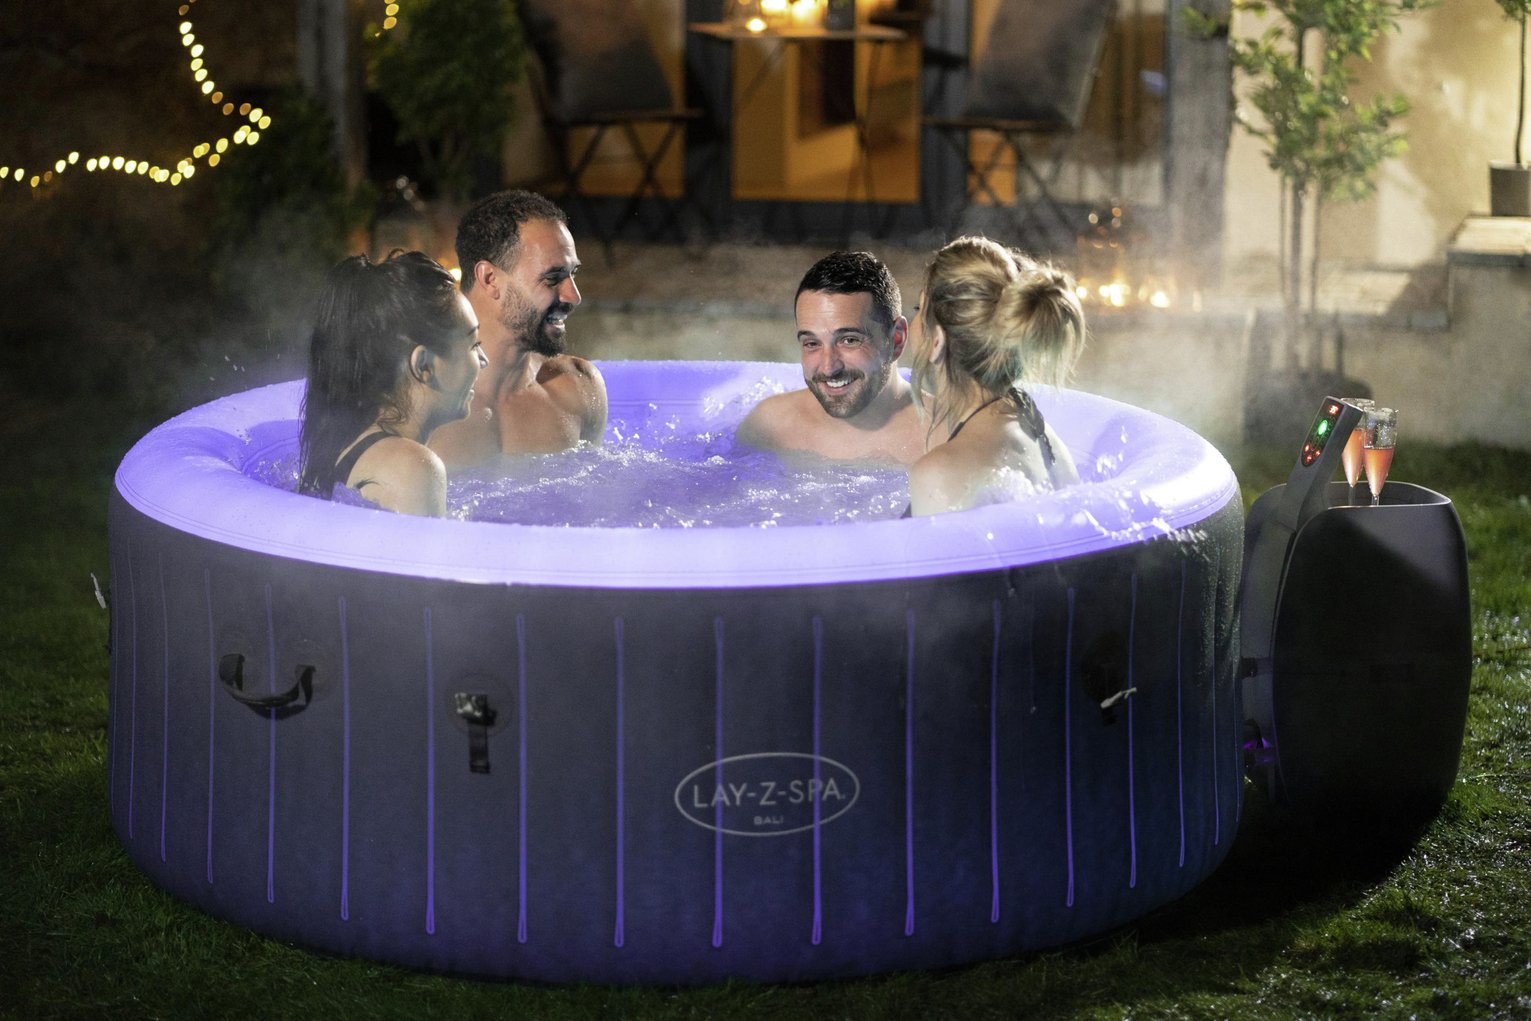 Lay Z Spa Bali 4 Person LED Hot Tub -Pick up In Store Only